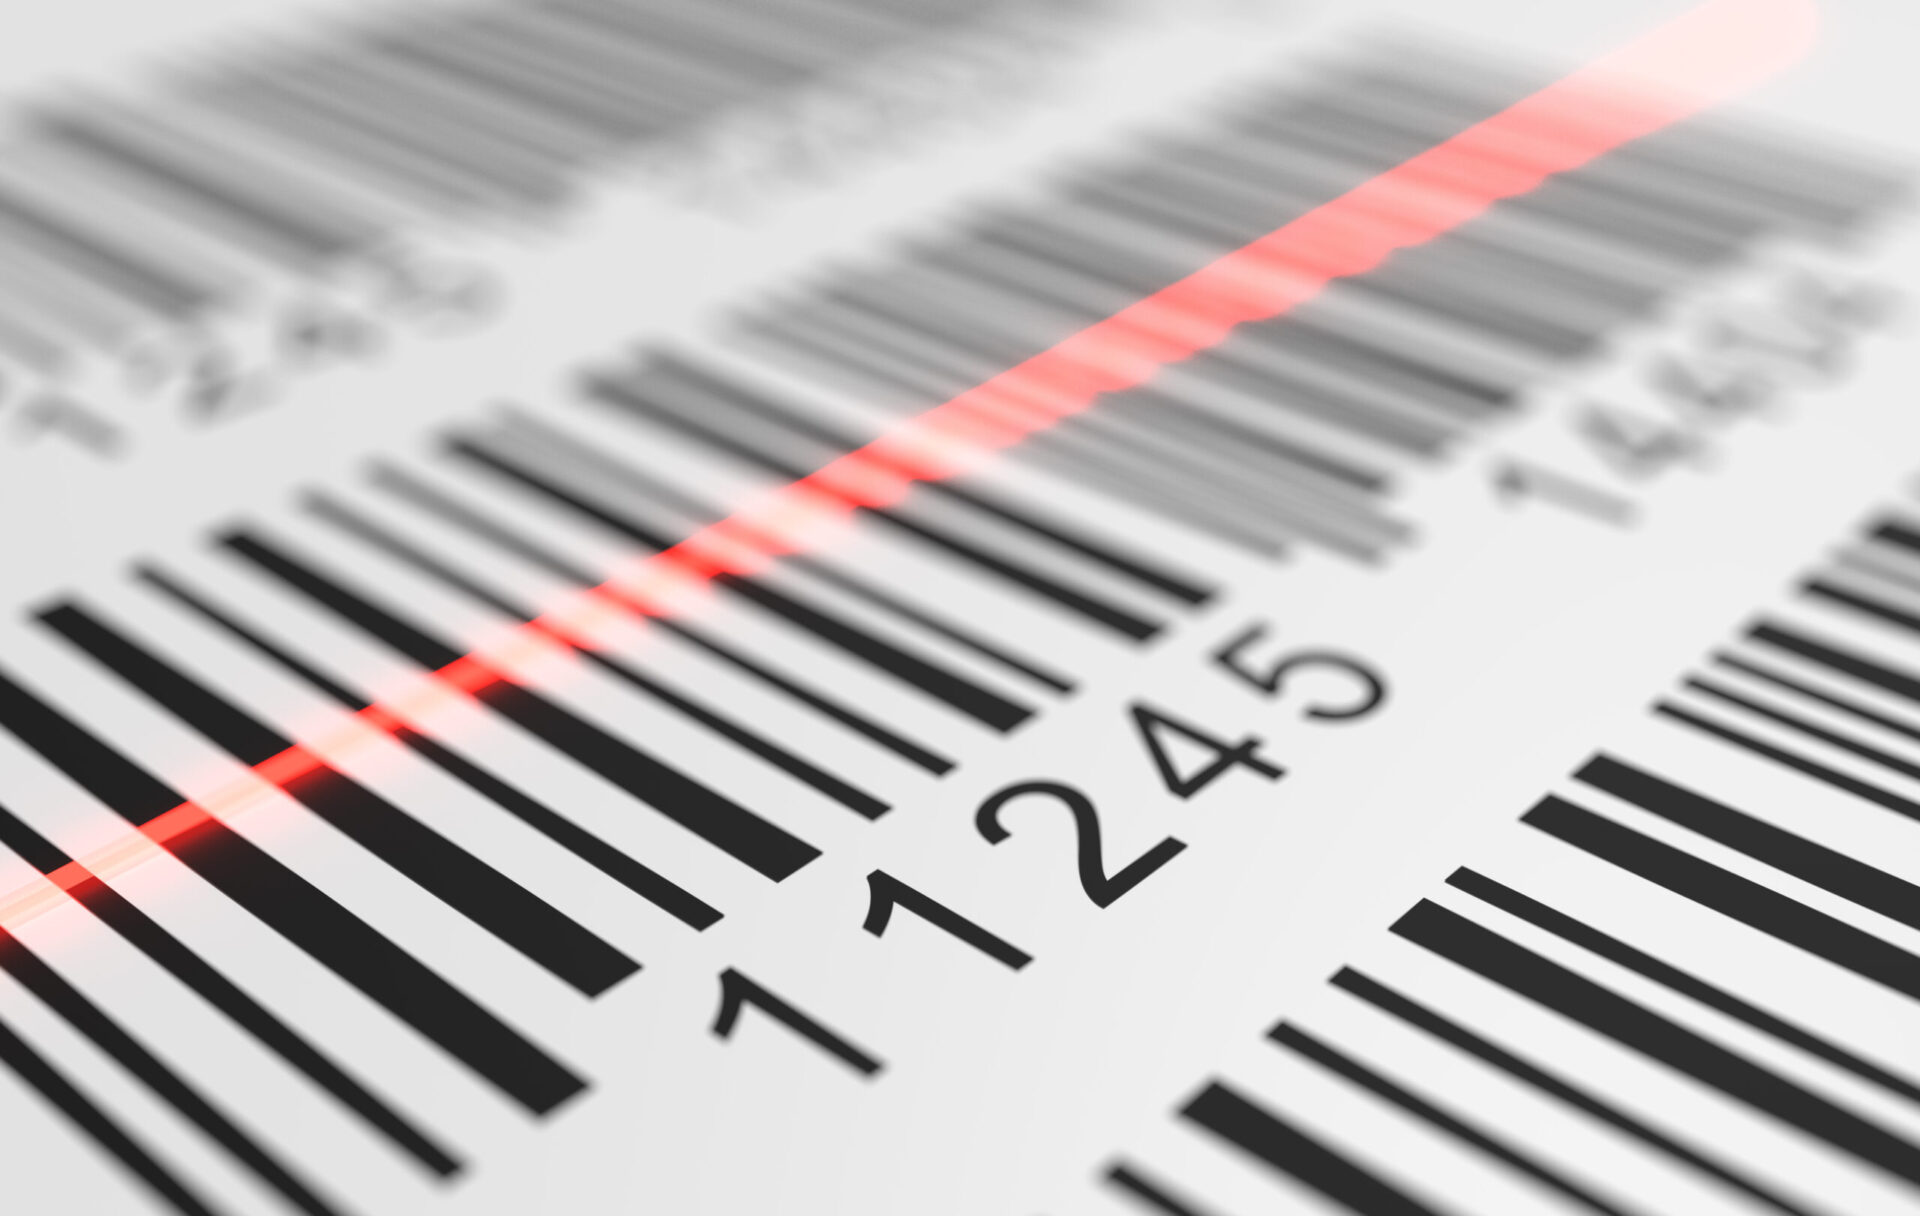 Close-up view on red laser is scanning label with barcode on product. 3D rendered illustration.